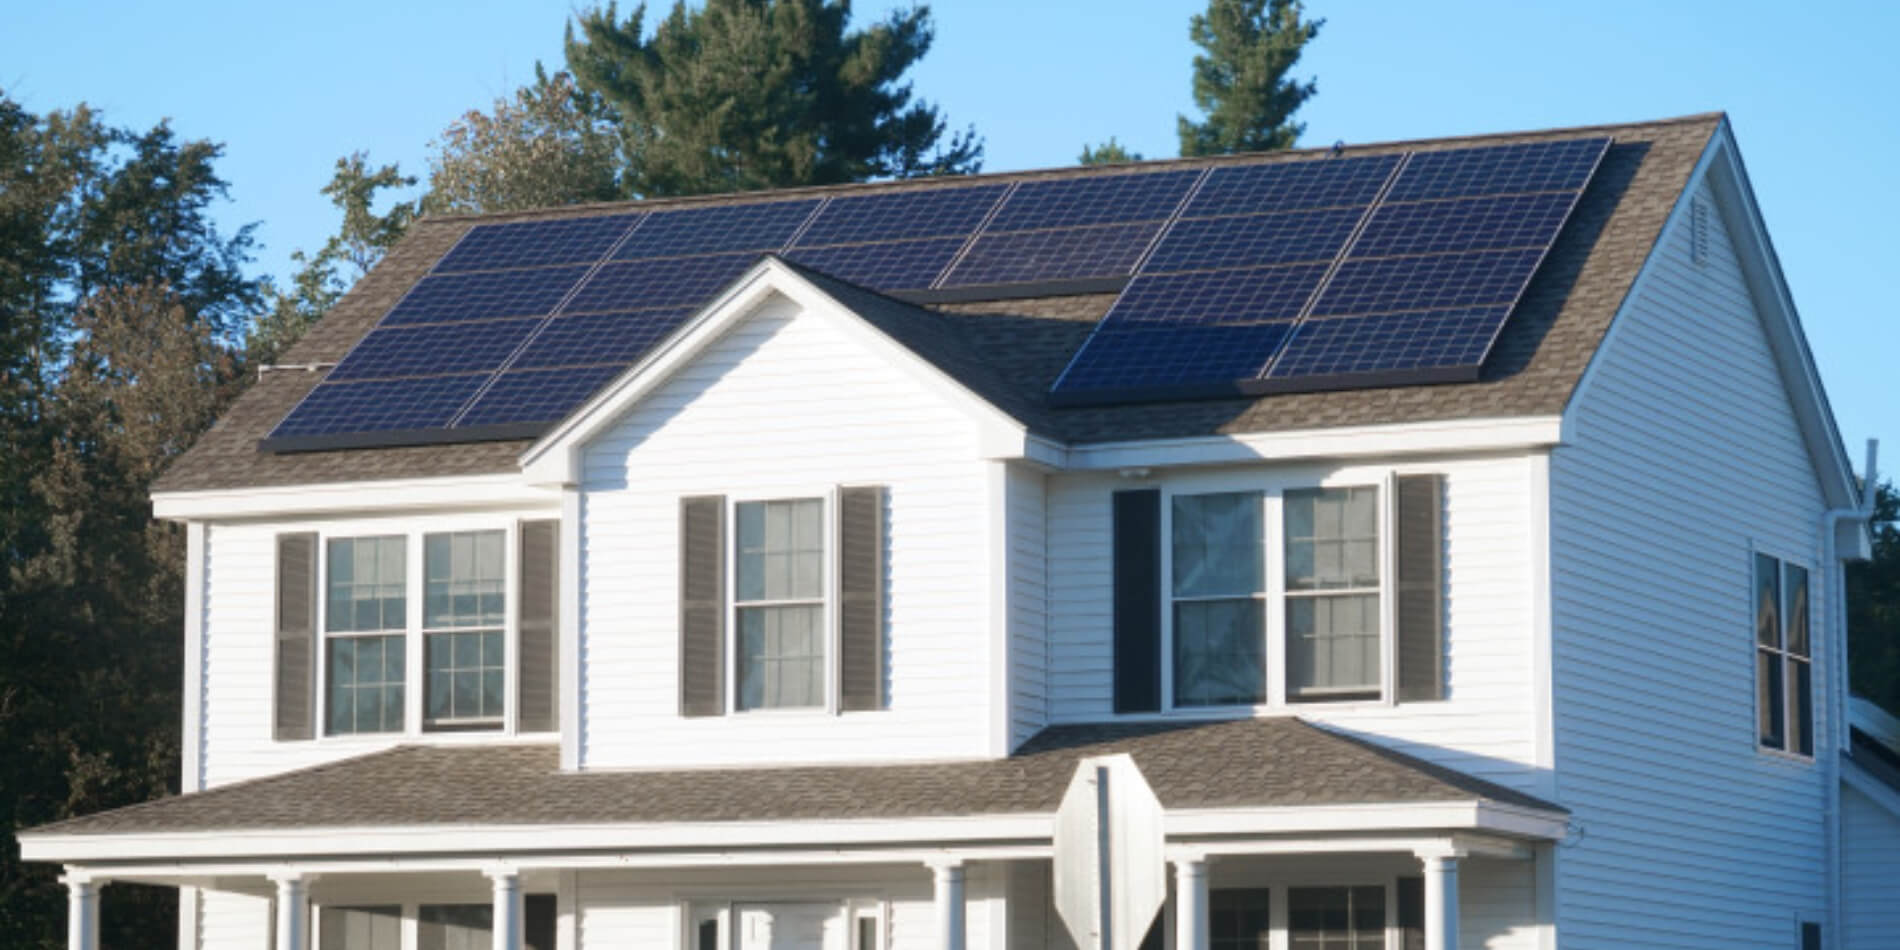 How to install solar panels on your roof?